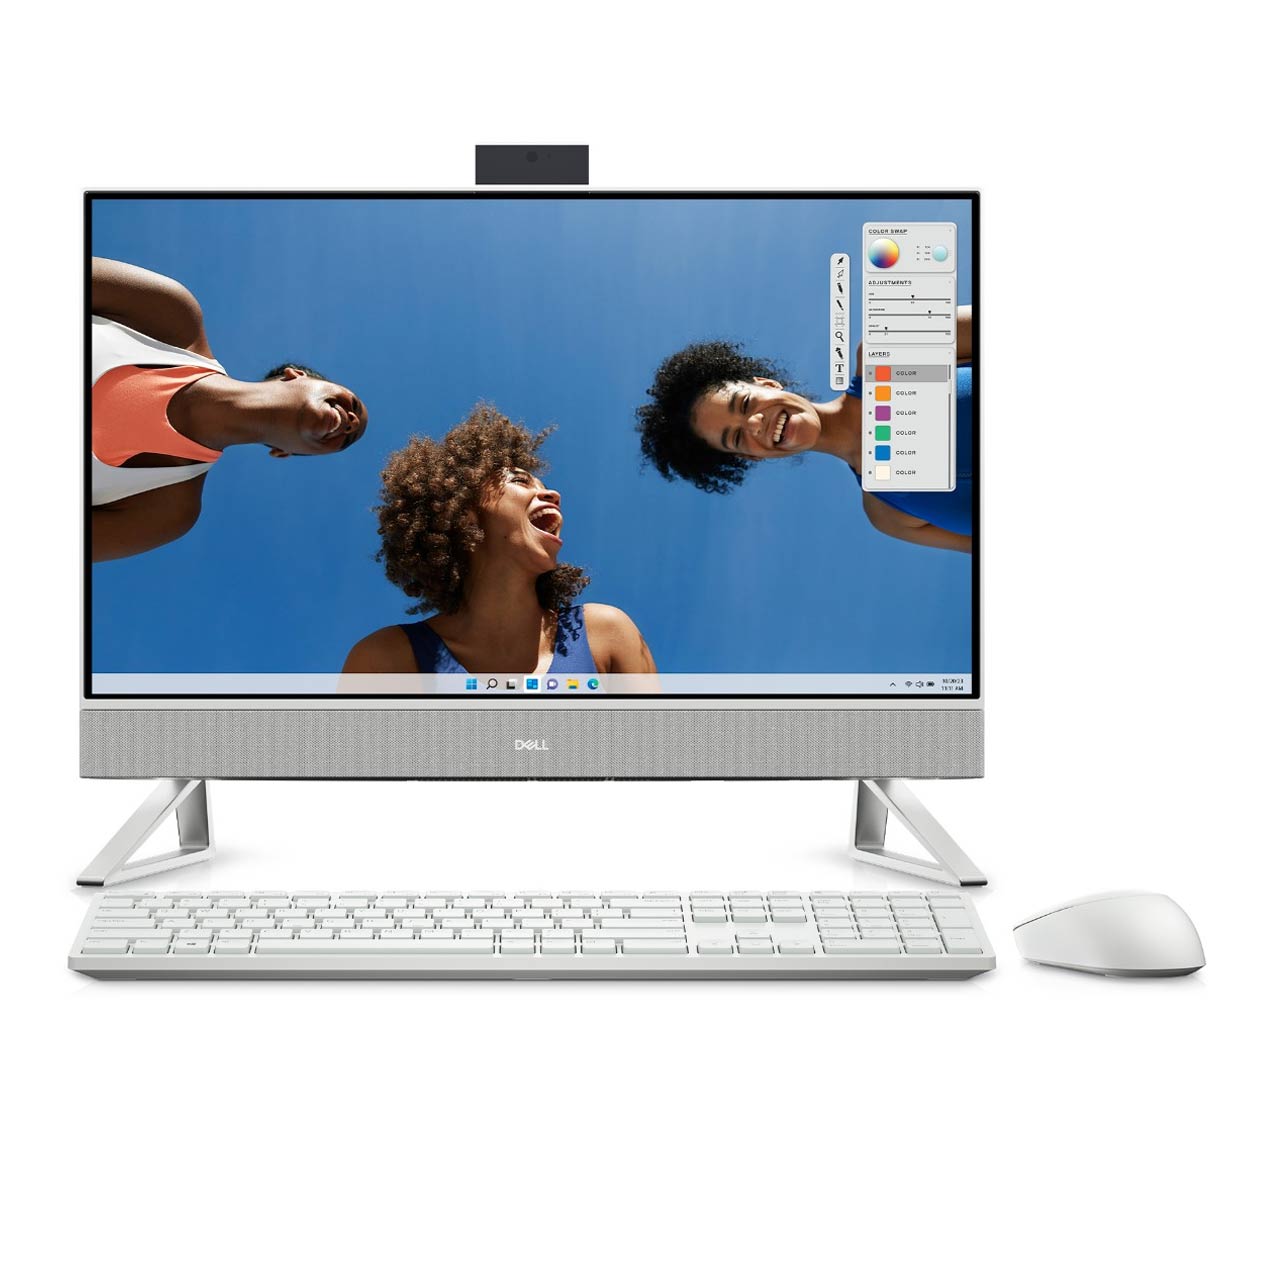 Inspiron 24 5000 (5430) All-in-One